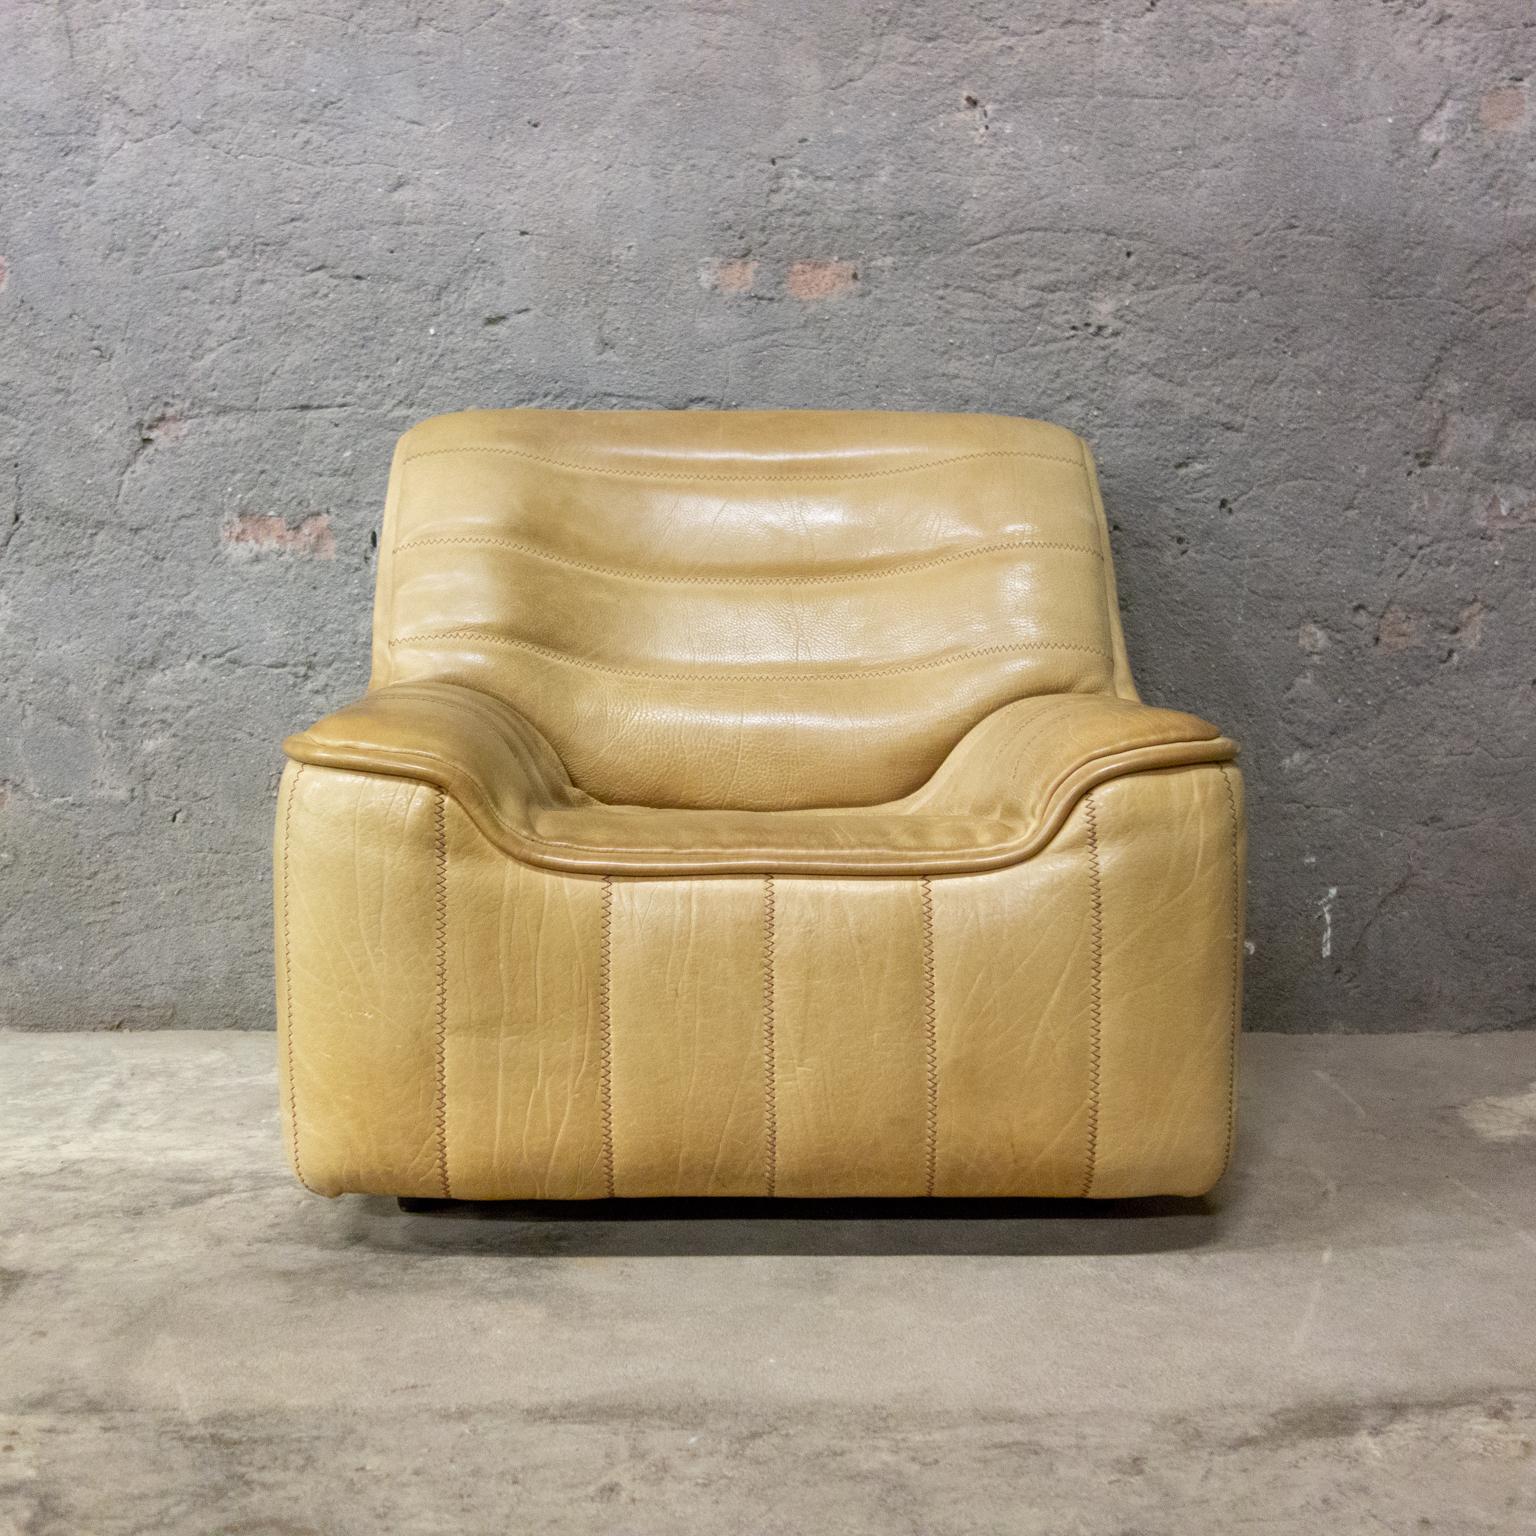 Hand-Crafted De Sede Armchair Model DS84, Brown Leather, Switzerland, Swiss Made, 1970s